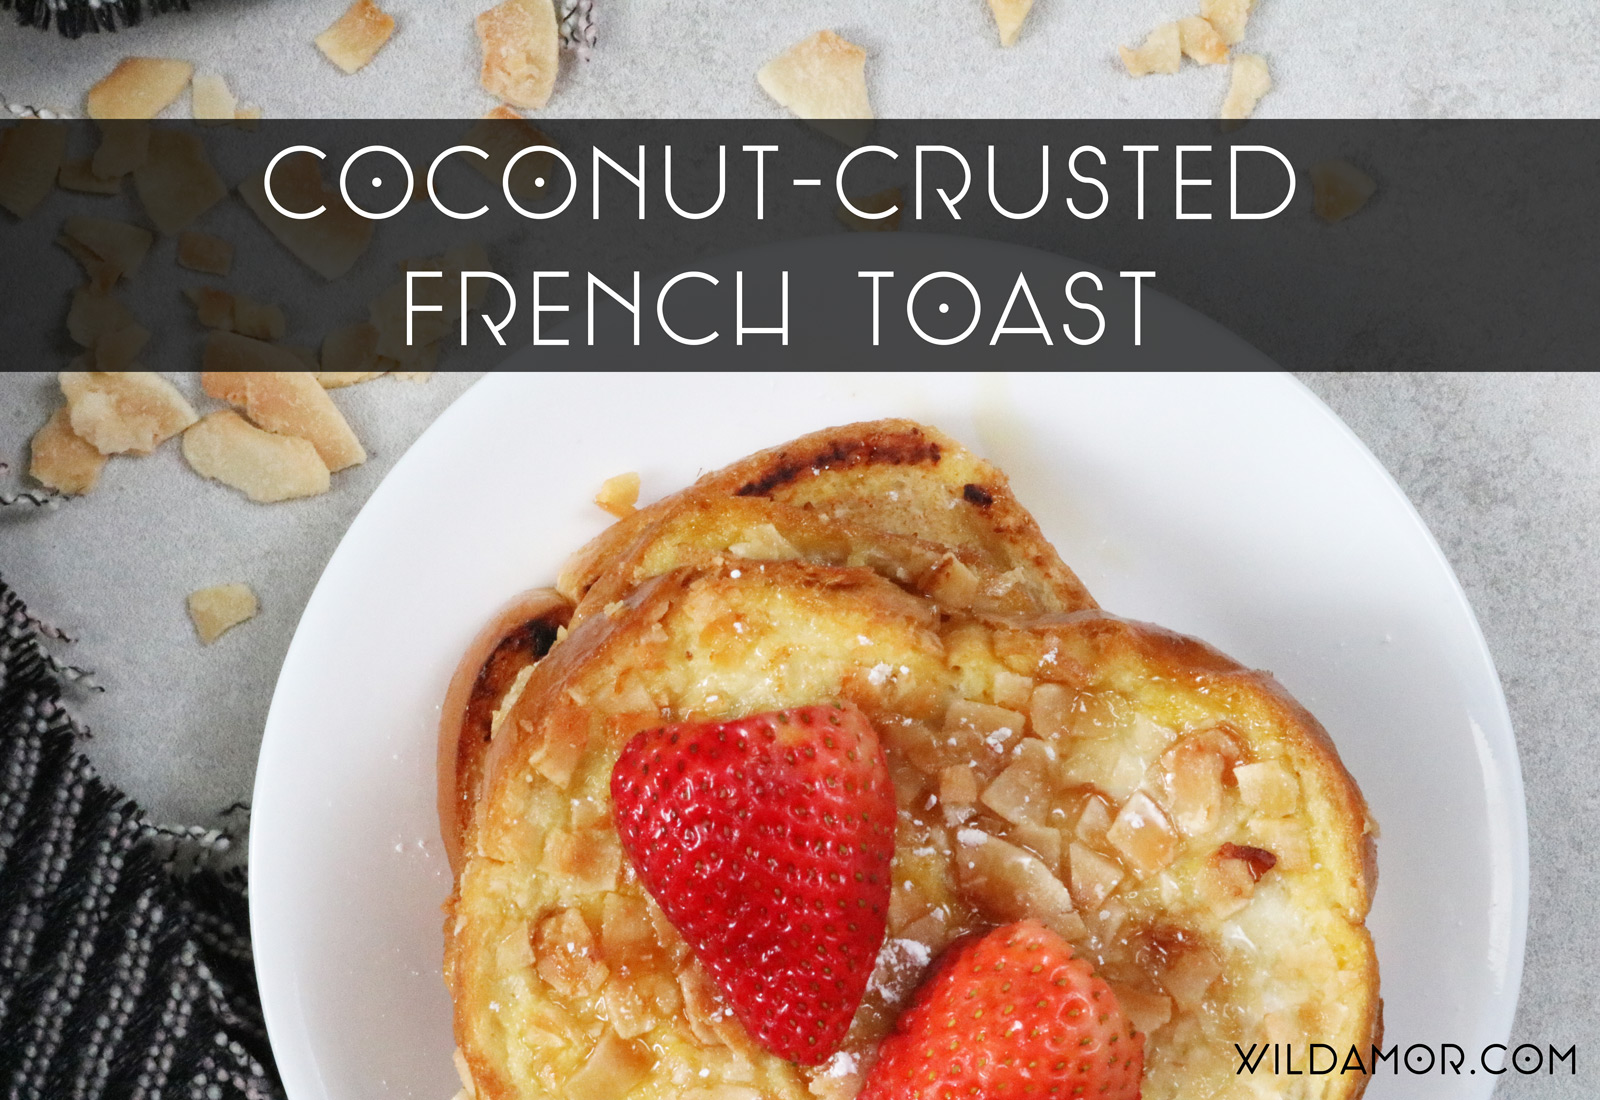 Coconut-Crusted French Toast Recipe